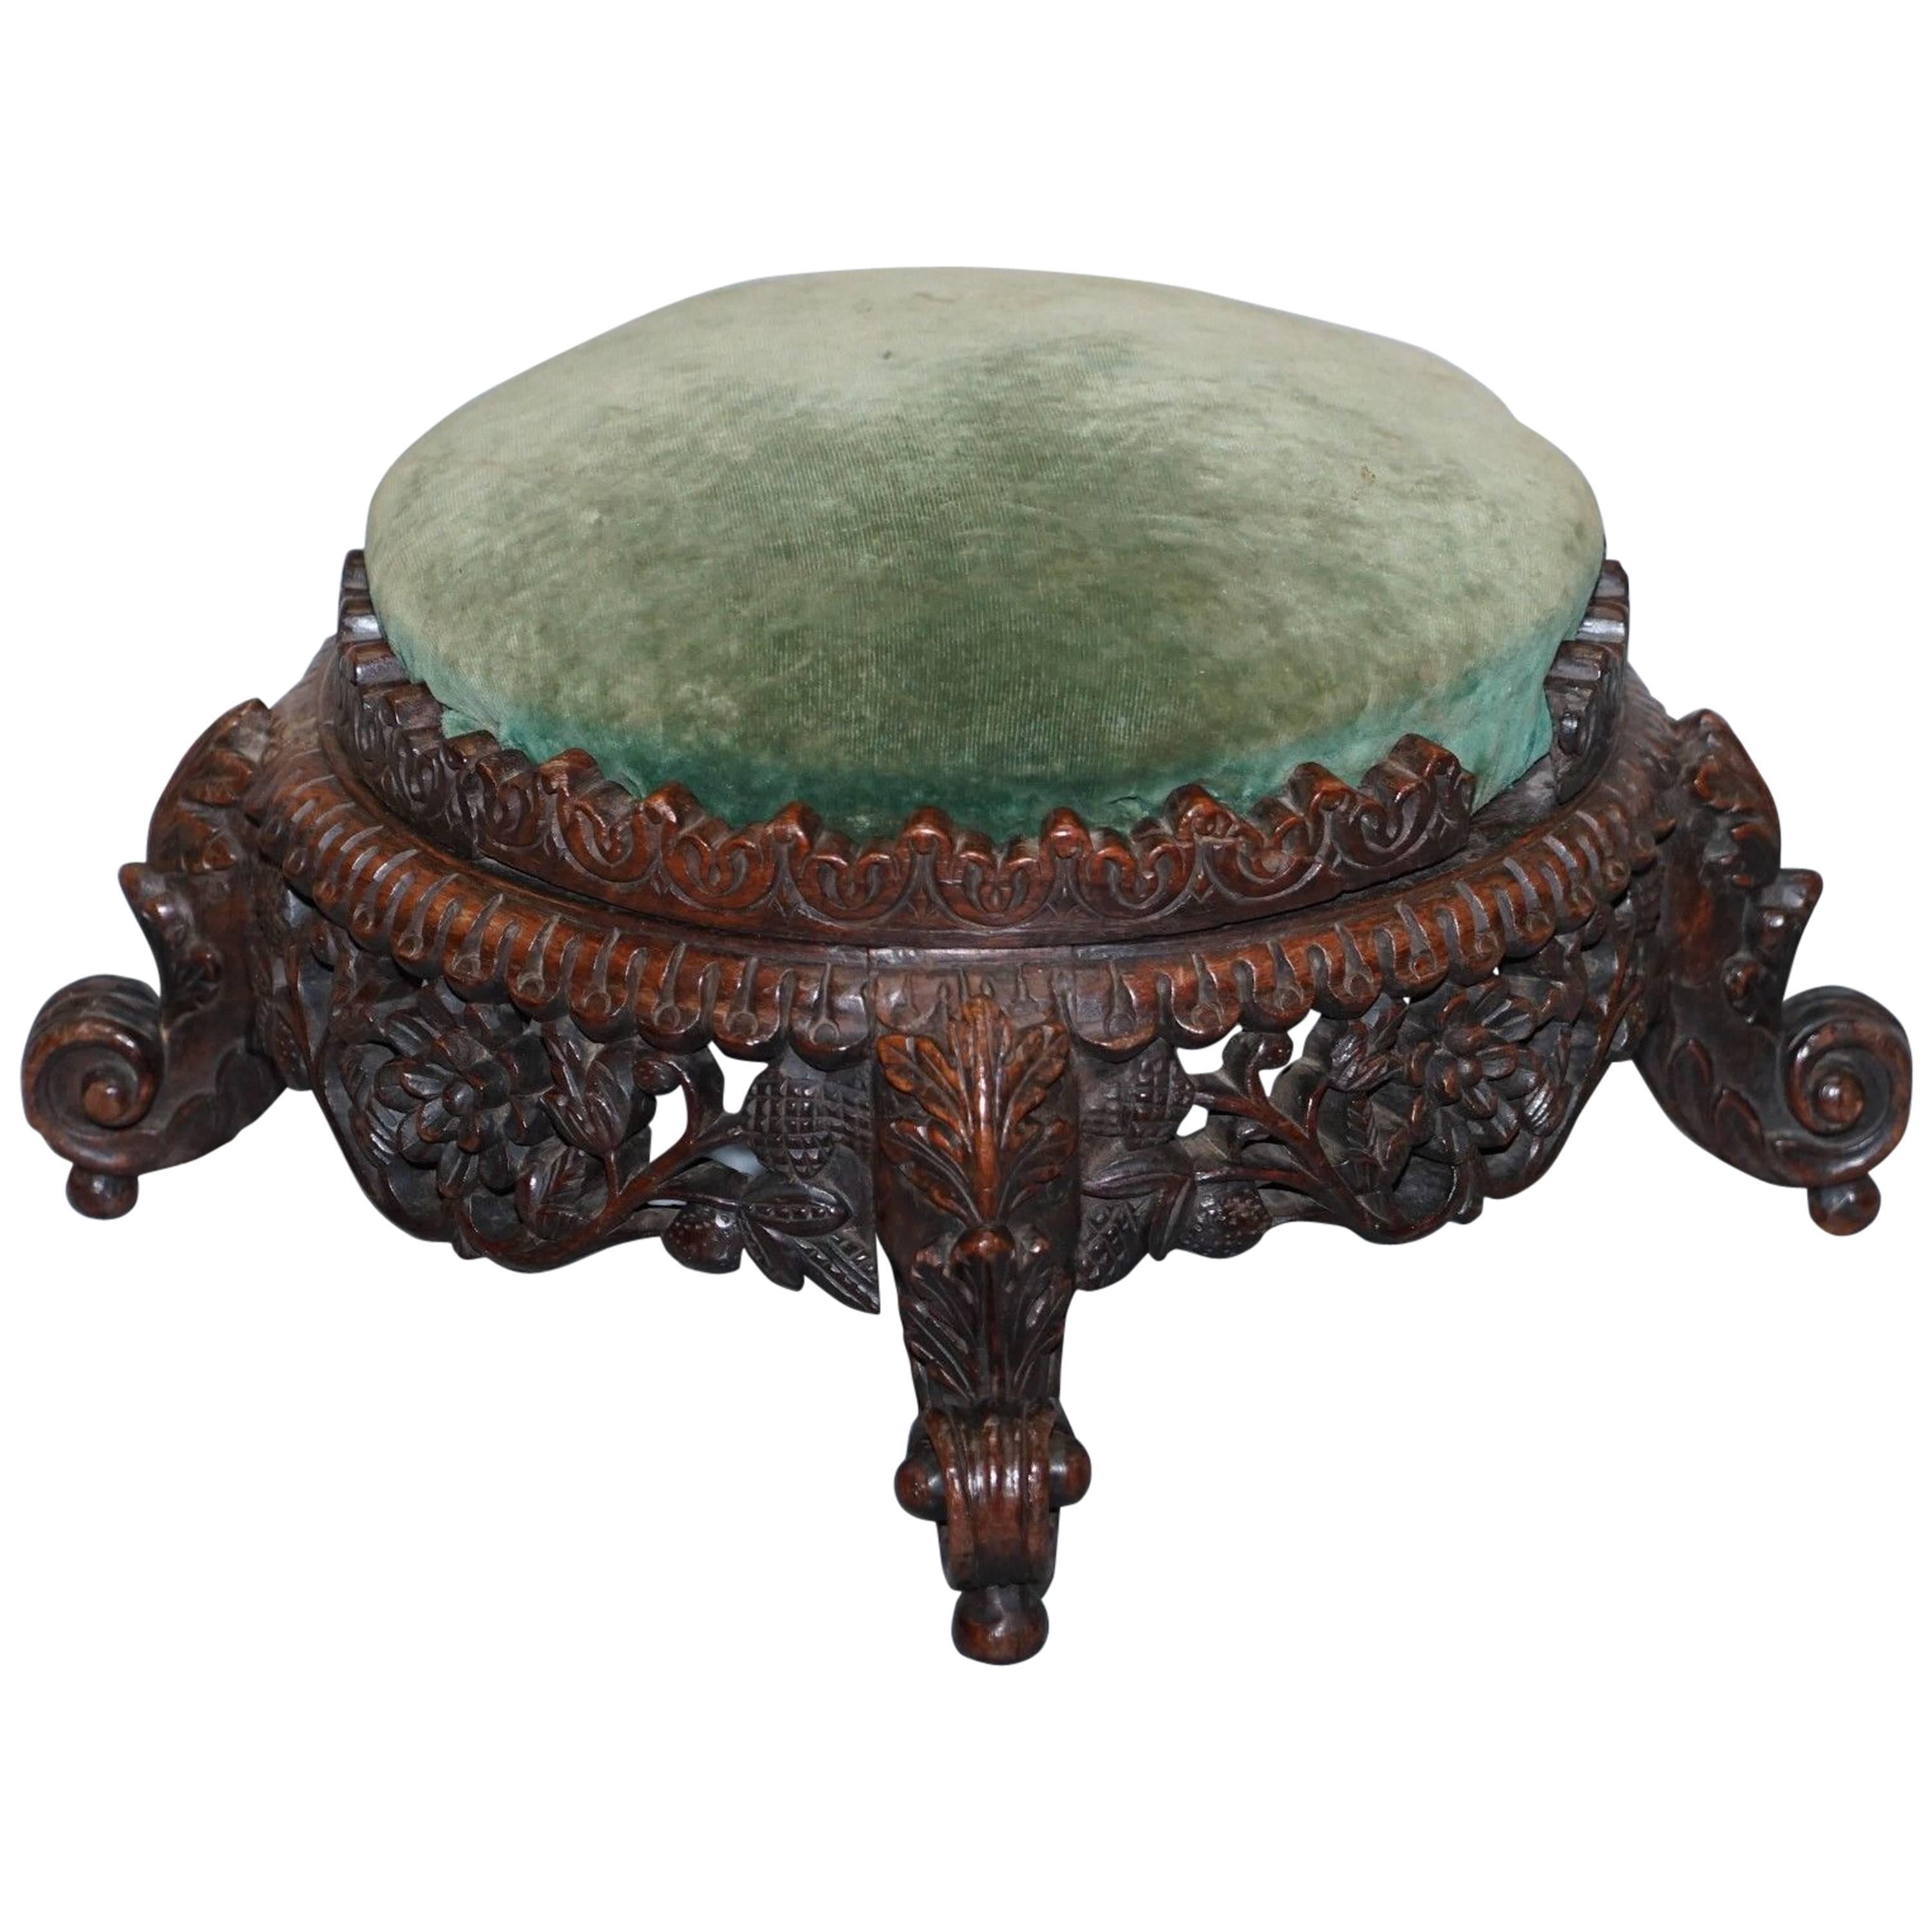 Lovely Small Hand-Carved Burmese Footstool Lovely Detailing All-Over Rare Find